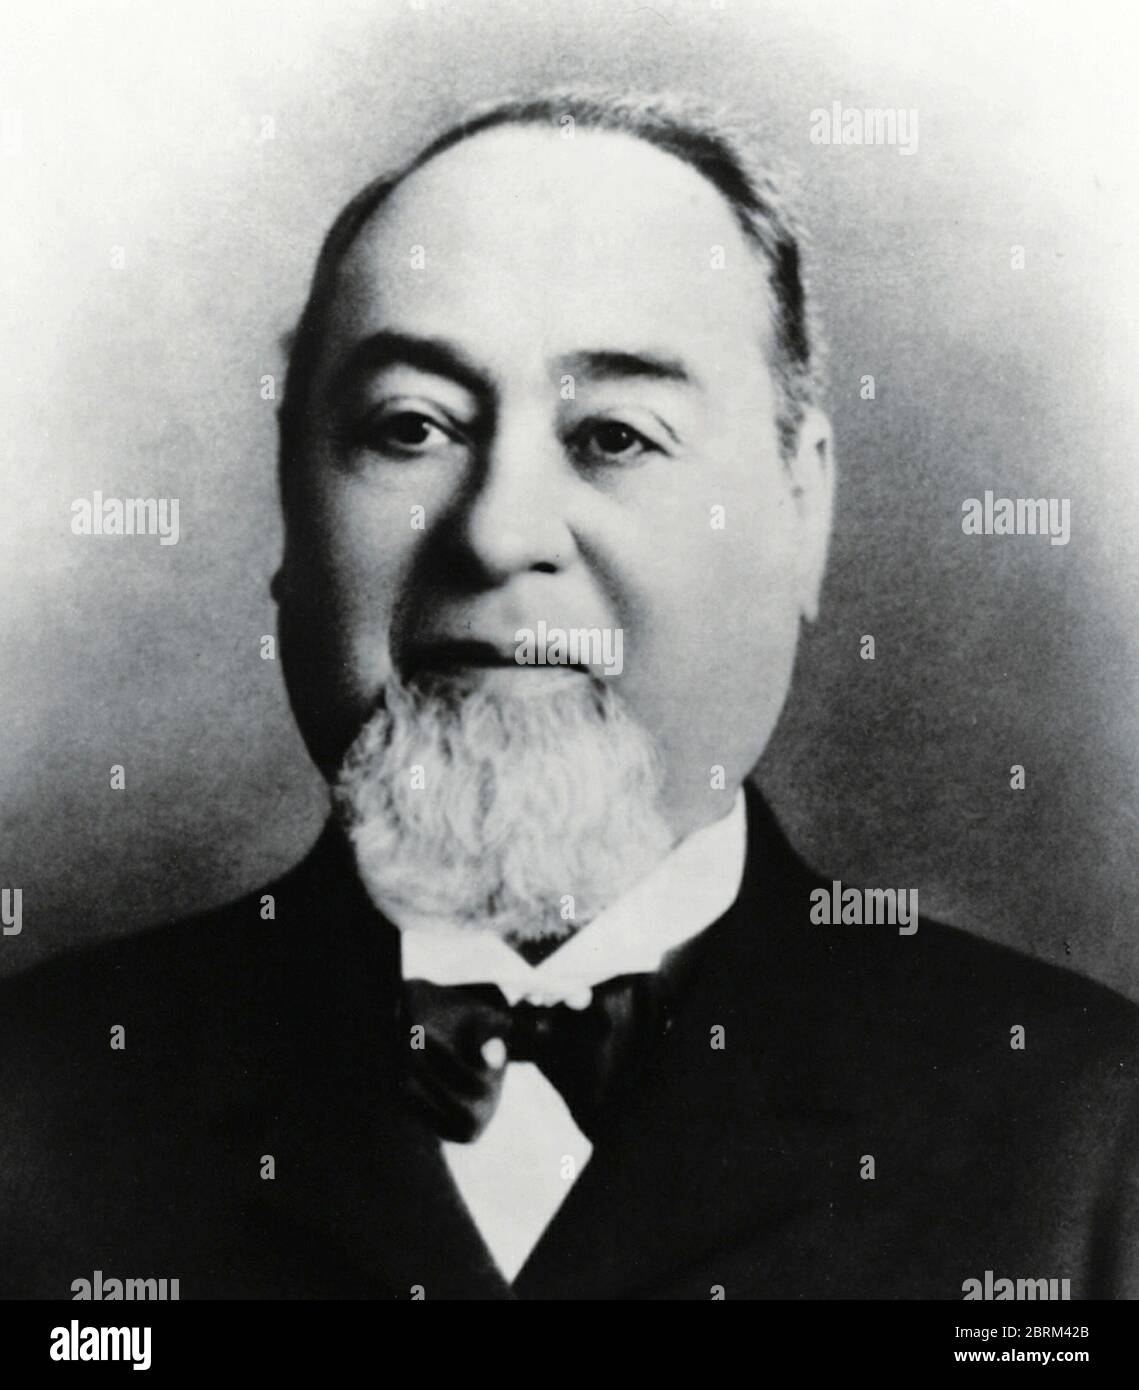 Levi Strauss (1829 – 1902) German-born businessman who founded the first company to manufacture blue jeans. His firm of Levi Strauss & Co. began in 1853 Stock Photo